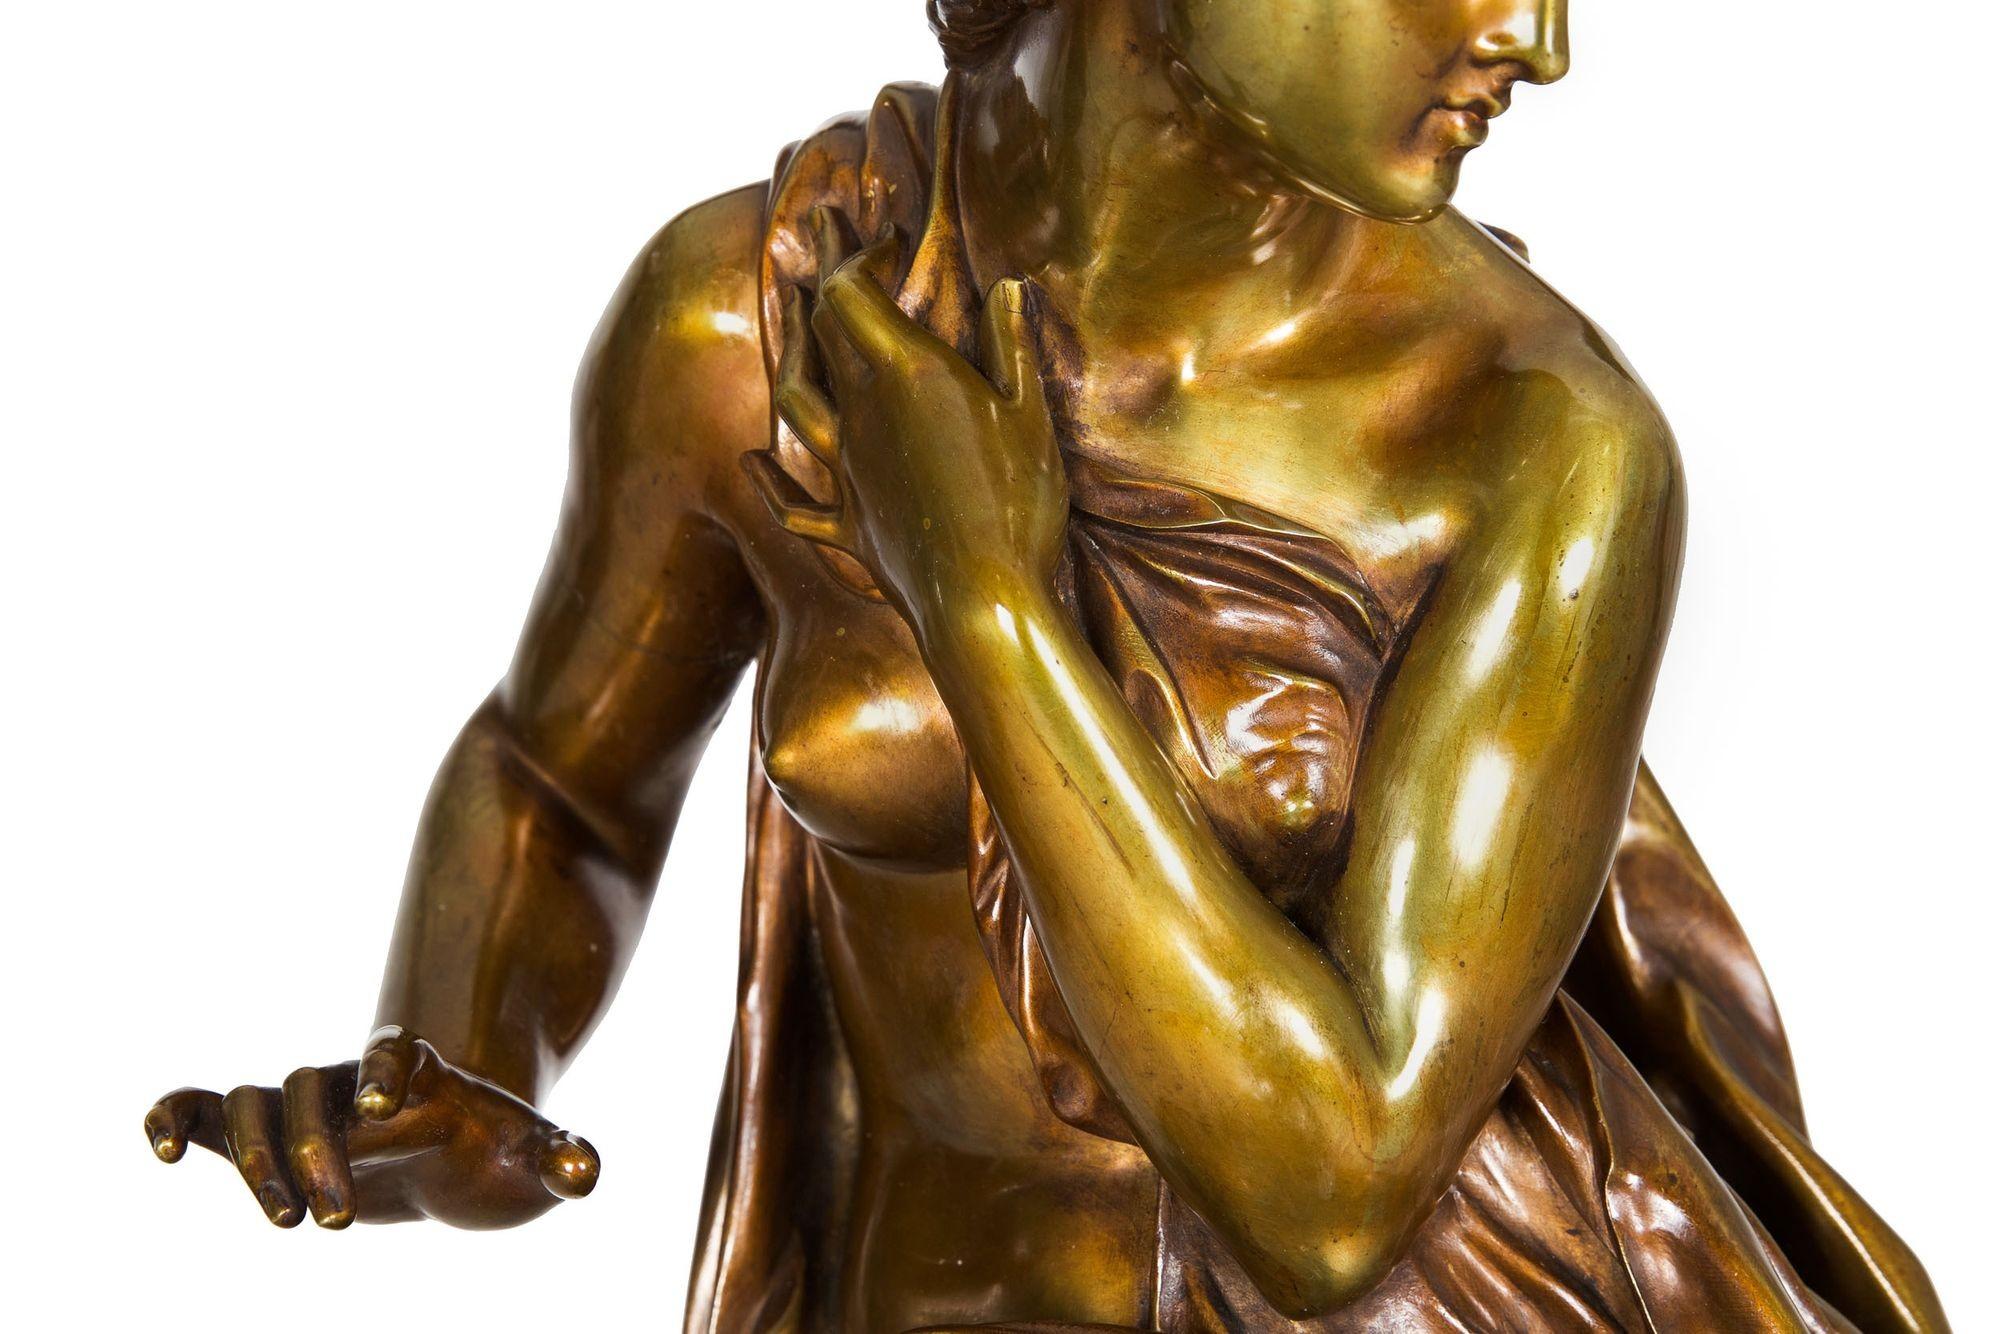 French Antique Bronze Sculpture “Seated Woman” by Etienne-Henri Dumaige, c.1880 For Sale 3